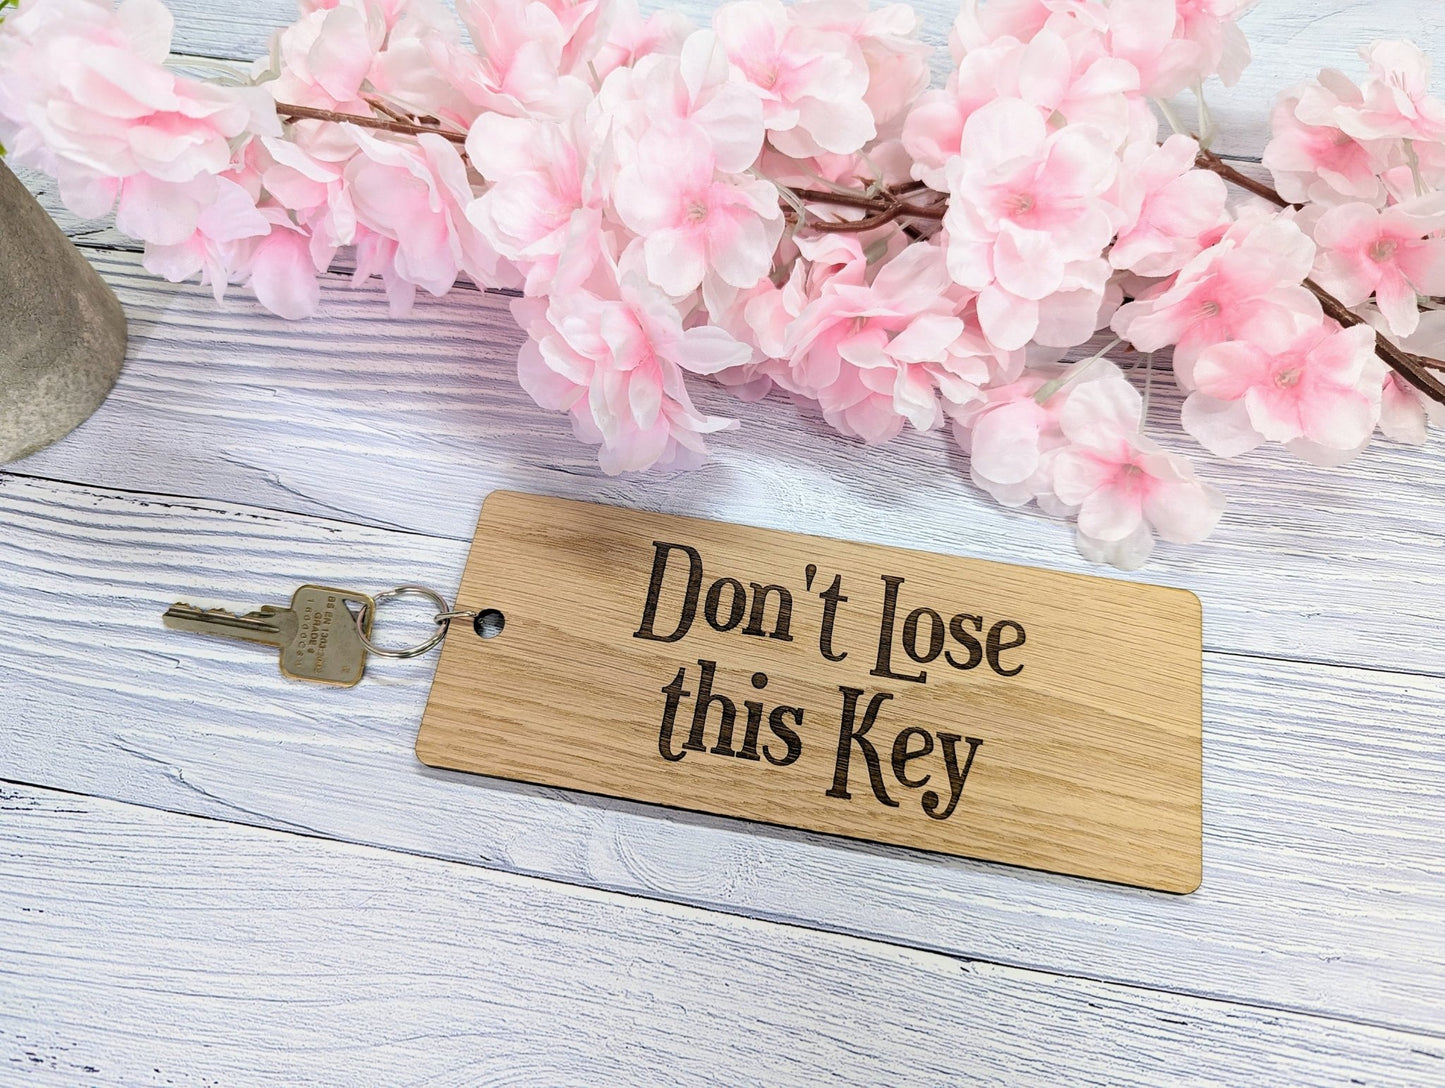 Extra-Large 200x80mm Wooden Keyring with 'Don't Lose This Key' Message - Ideal for Important Keys or Habitual Key Losers - CherryGroveCraft